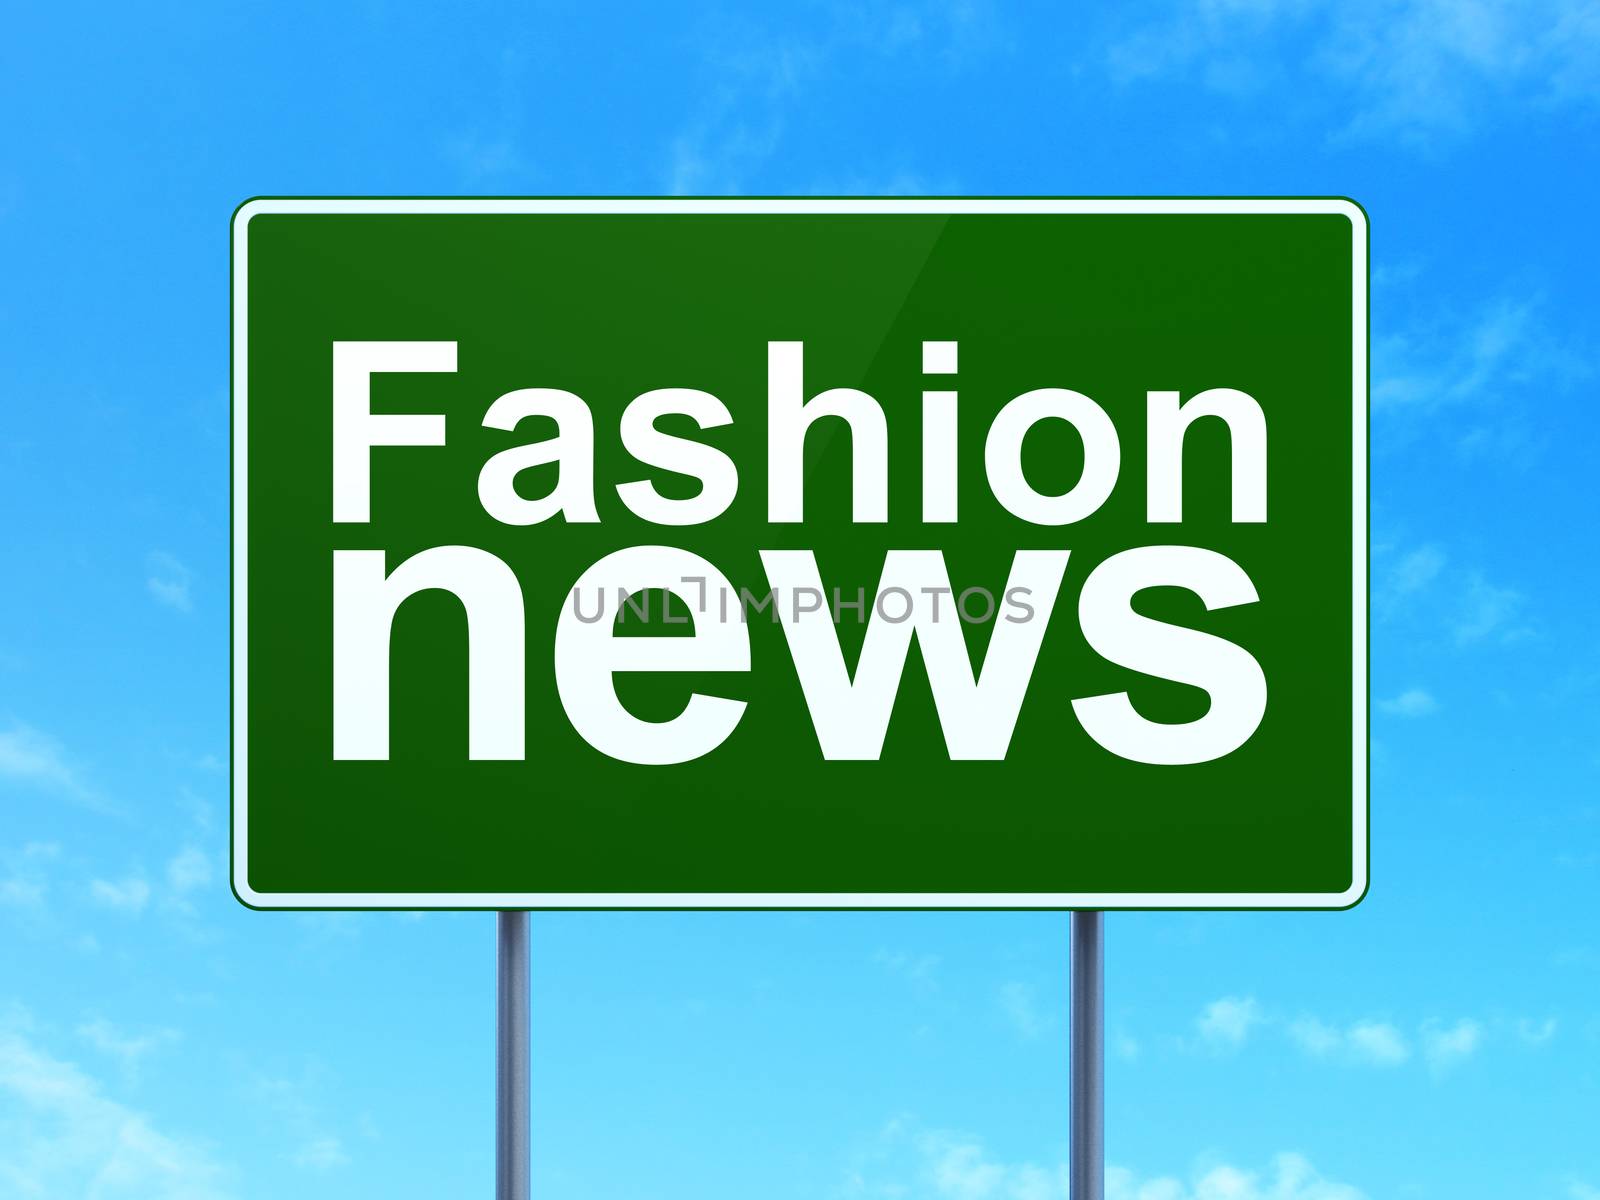 News concept: Fashion News on green road highway sign, clear blue sky background, 3D rendering